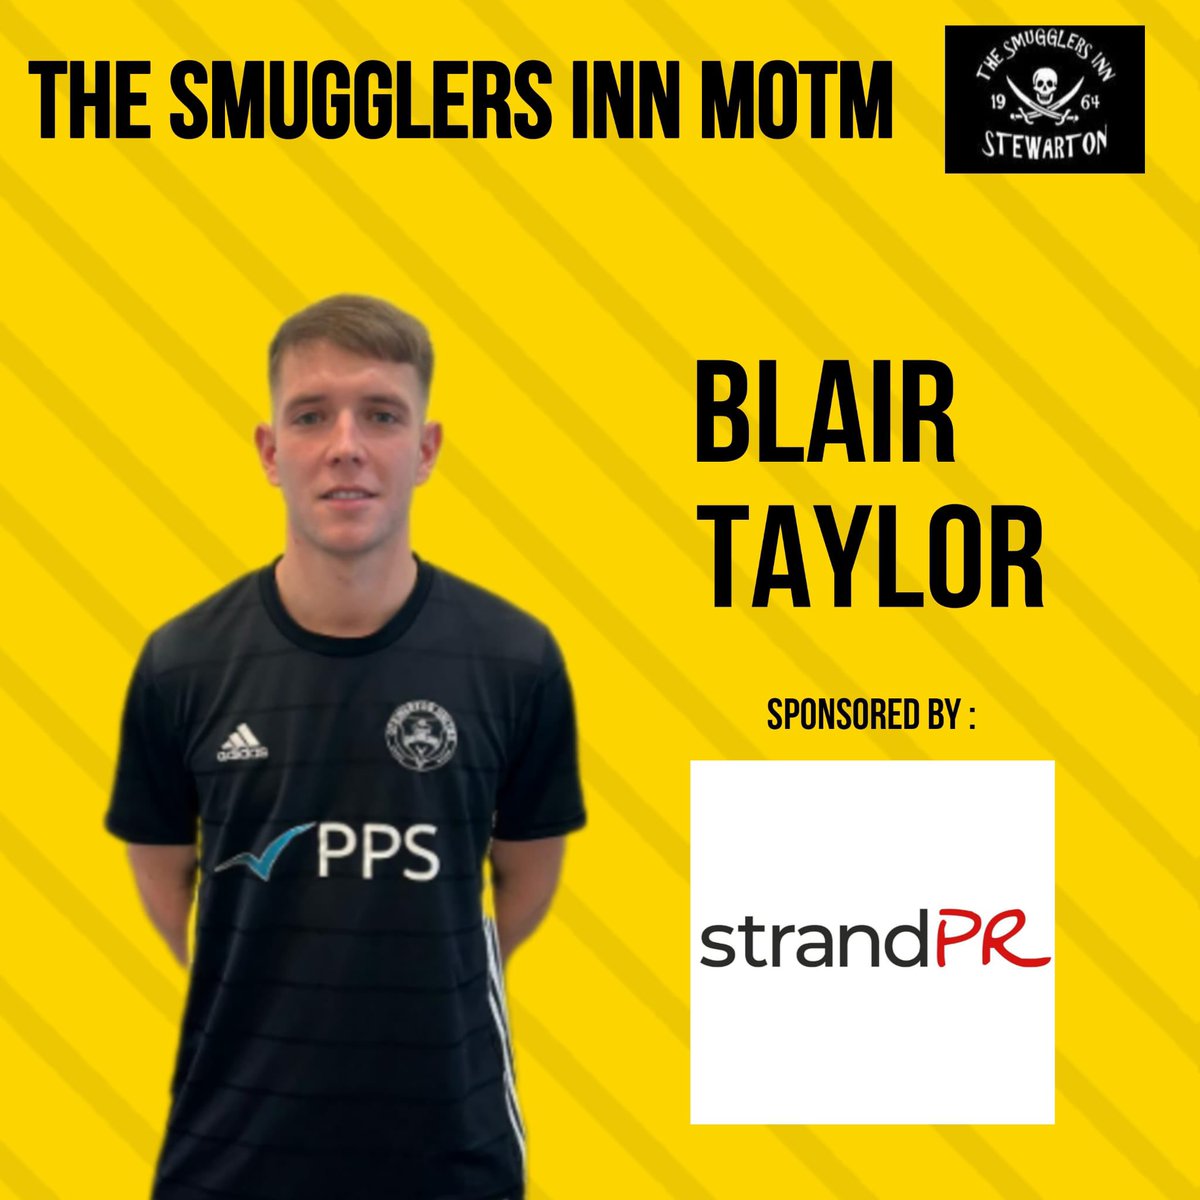 Todays @smugglers_the Man of The Match goes to Blair Taylor. Blair is sponsored by @strandPR